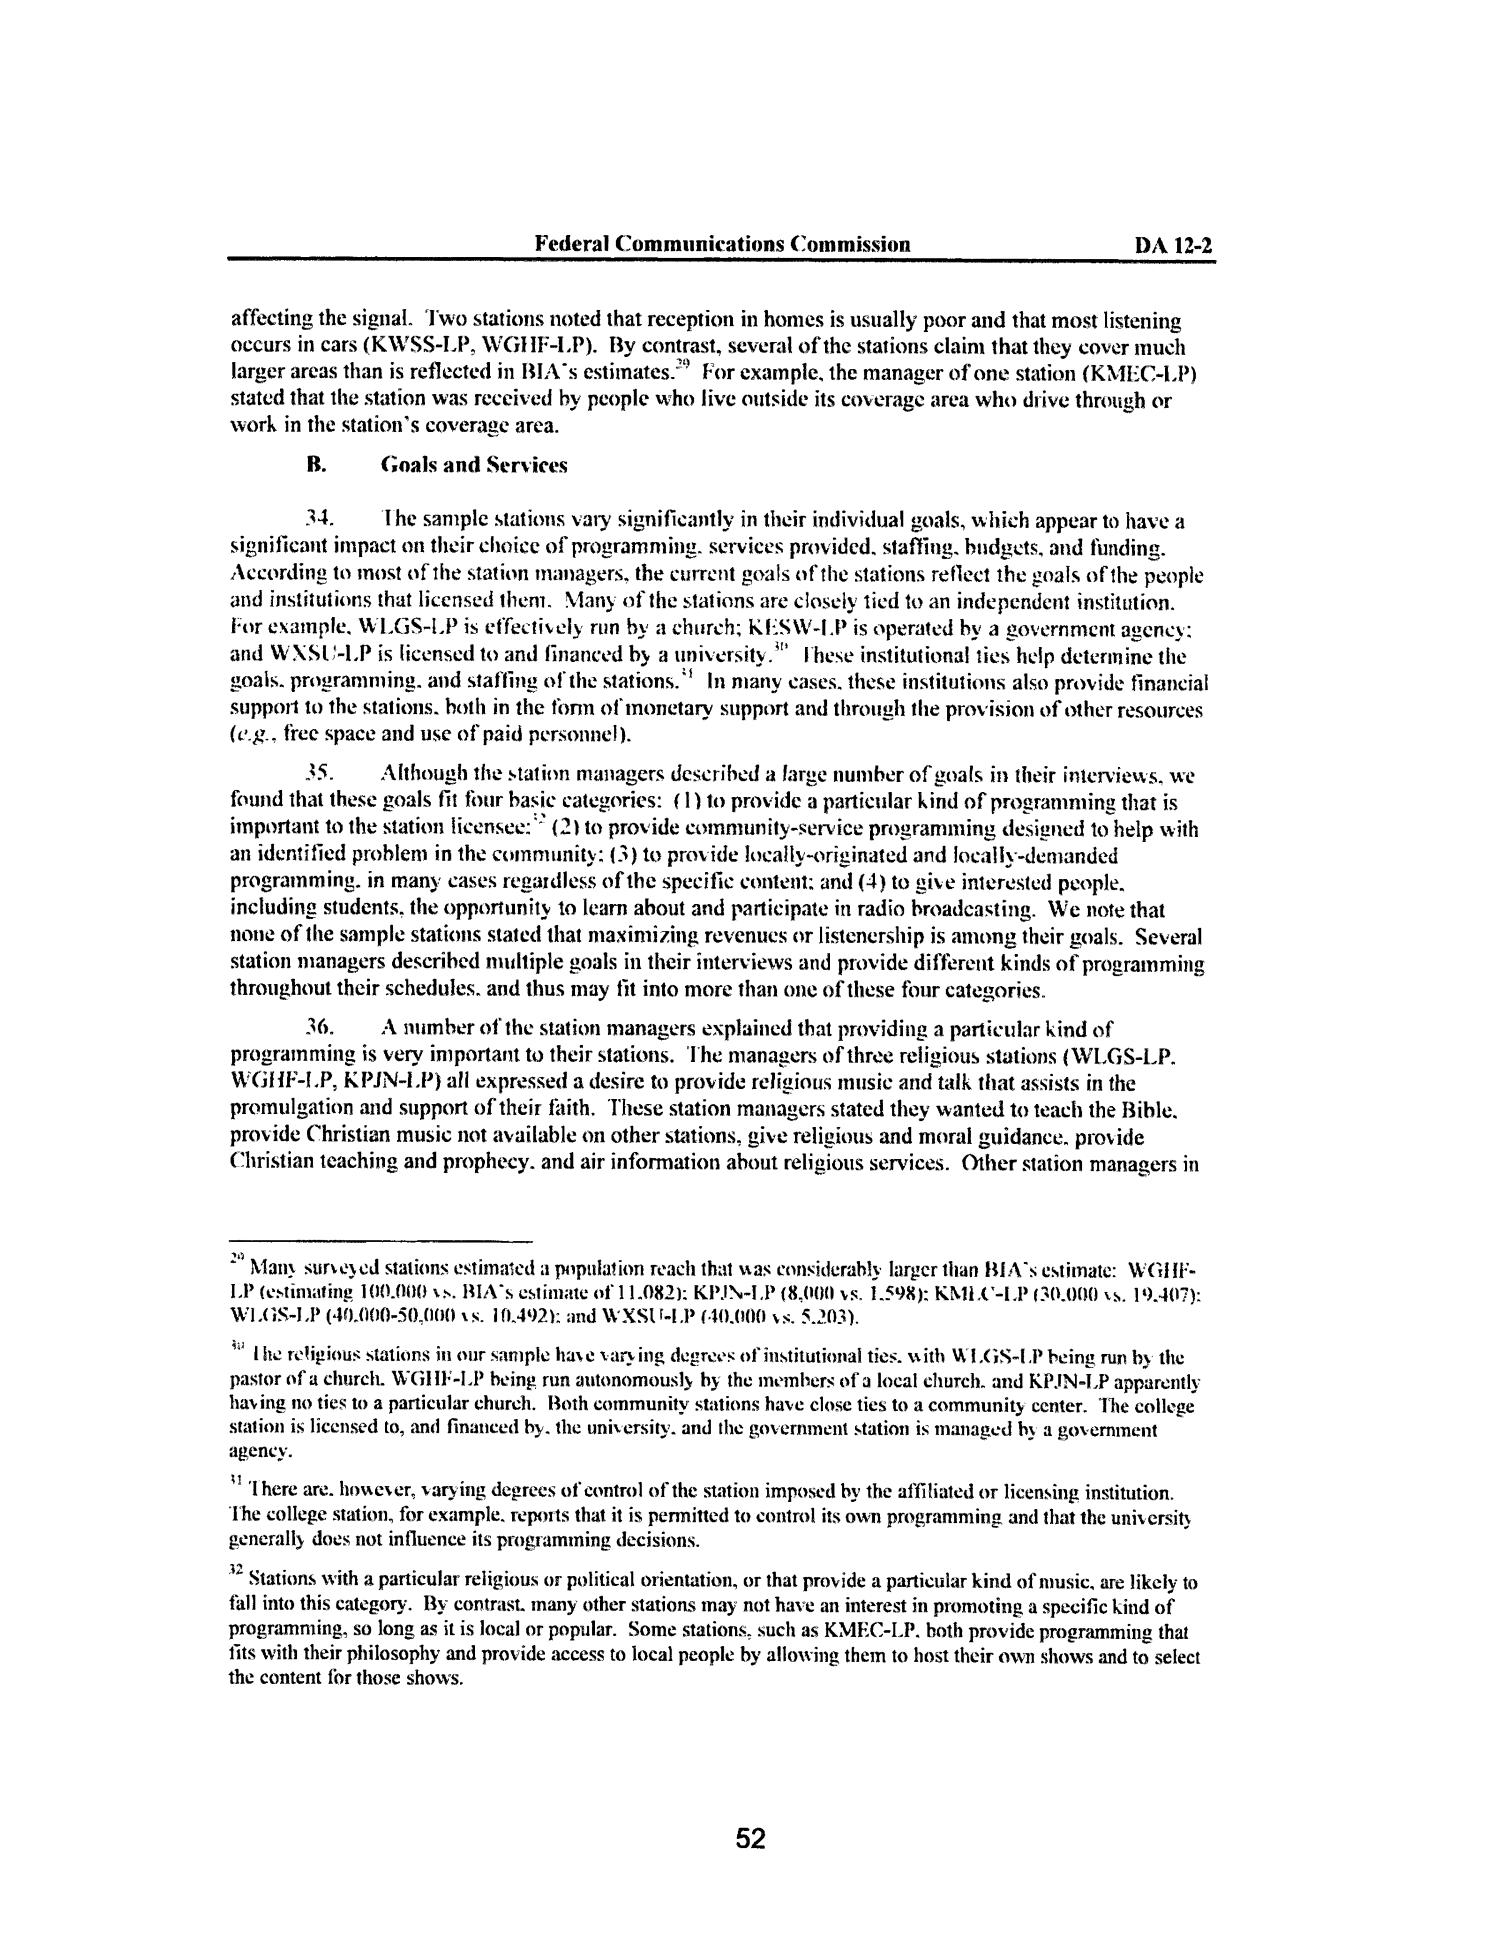 FCC Record, Volume 27, No. 1, Pages 1 to 936, January 3 - February 3, 2012
                                                
                                                    52
                                                